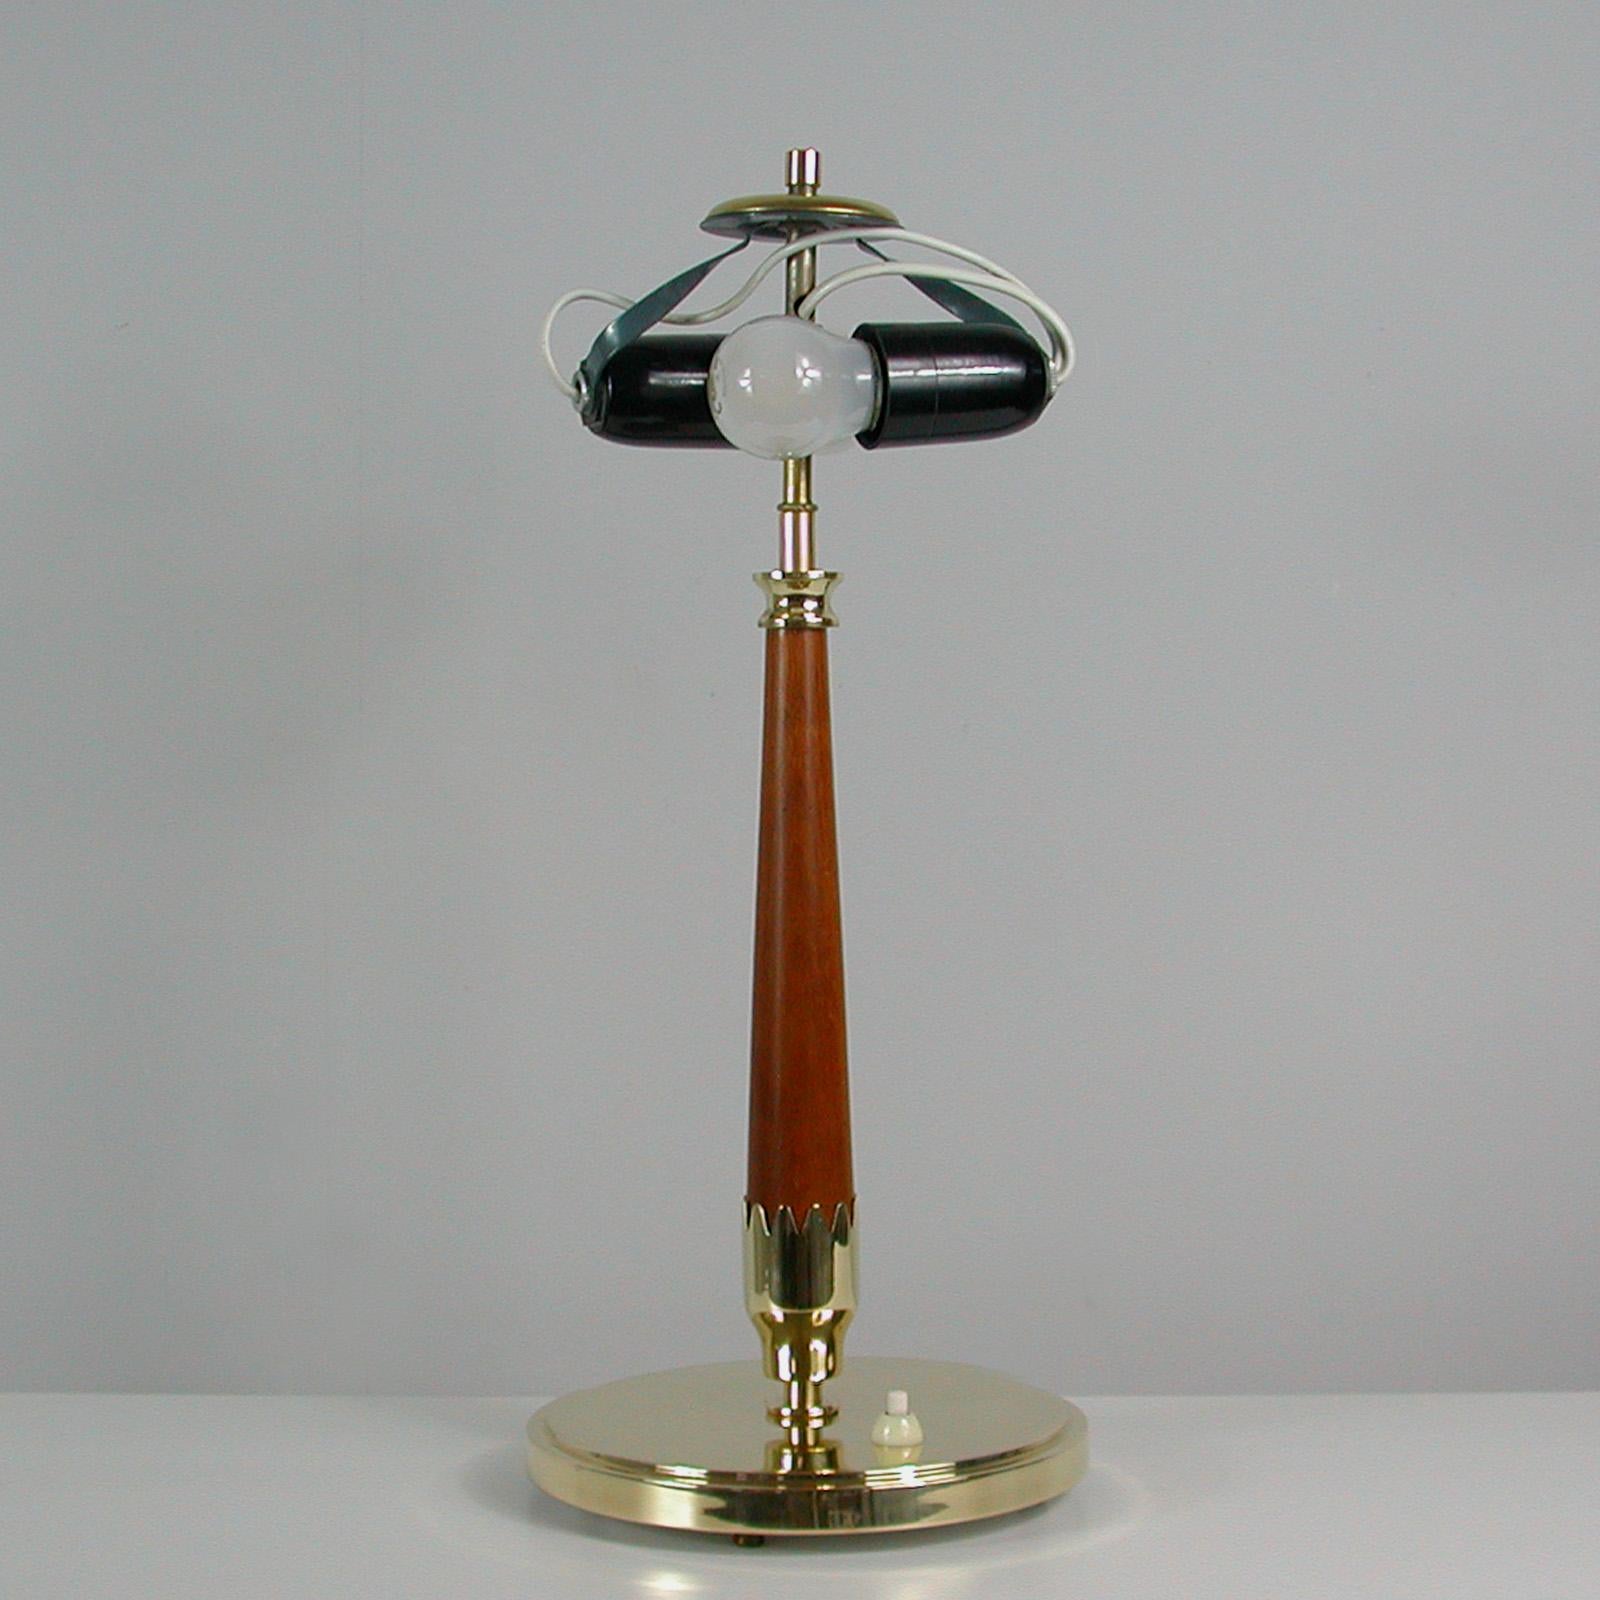 Midcentury Swedish Teak, Brass and Frosted Glass Table Lamp by Böhlmarks, 1950s For Sale 7